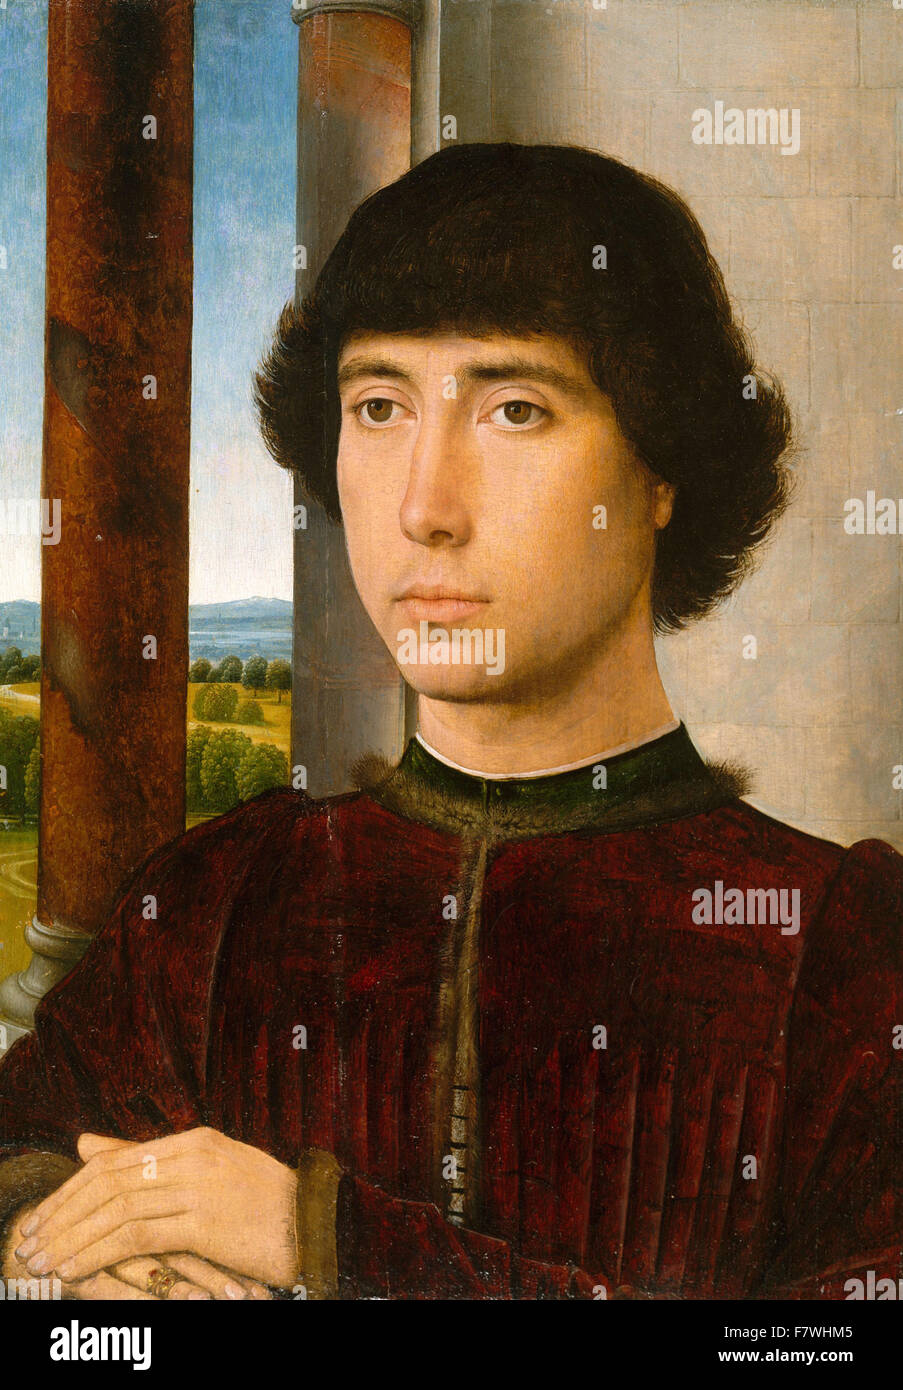 Hans Memling - Portrait of a Young Man Stock Photo - Alamy